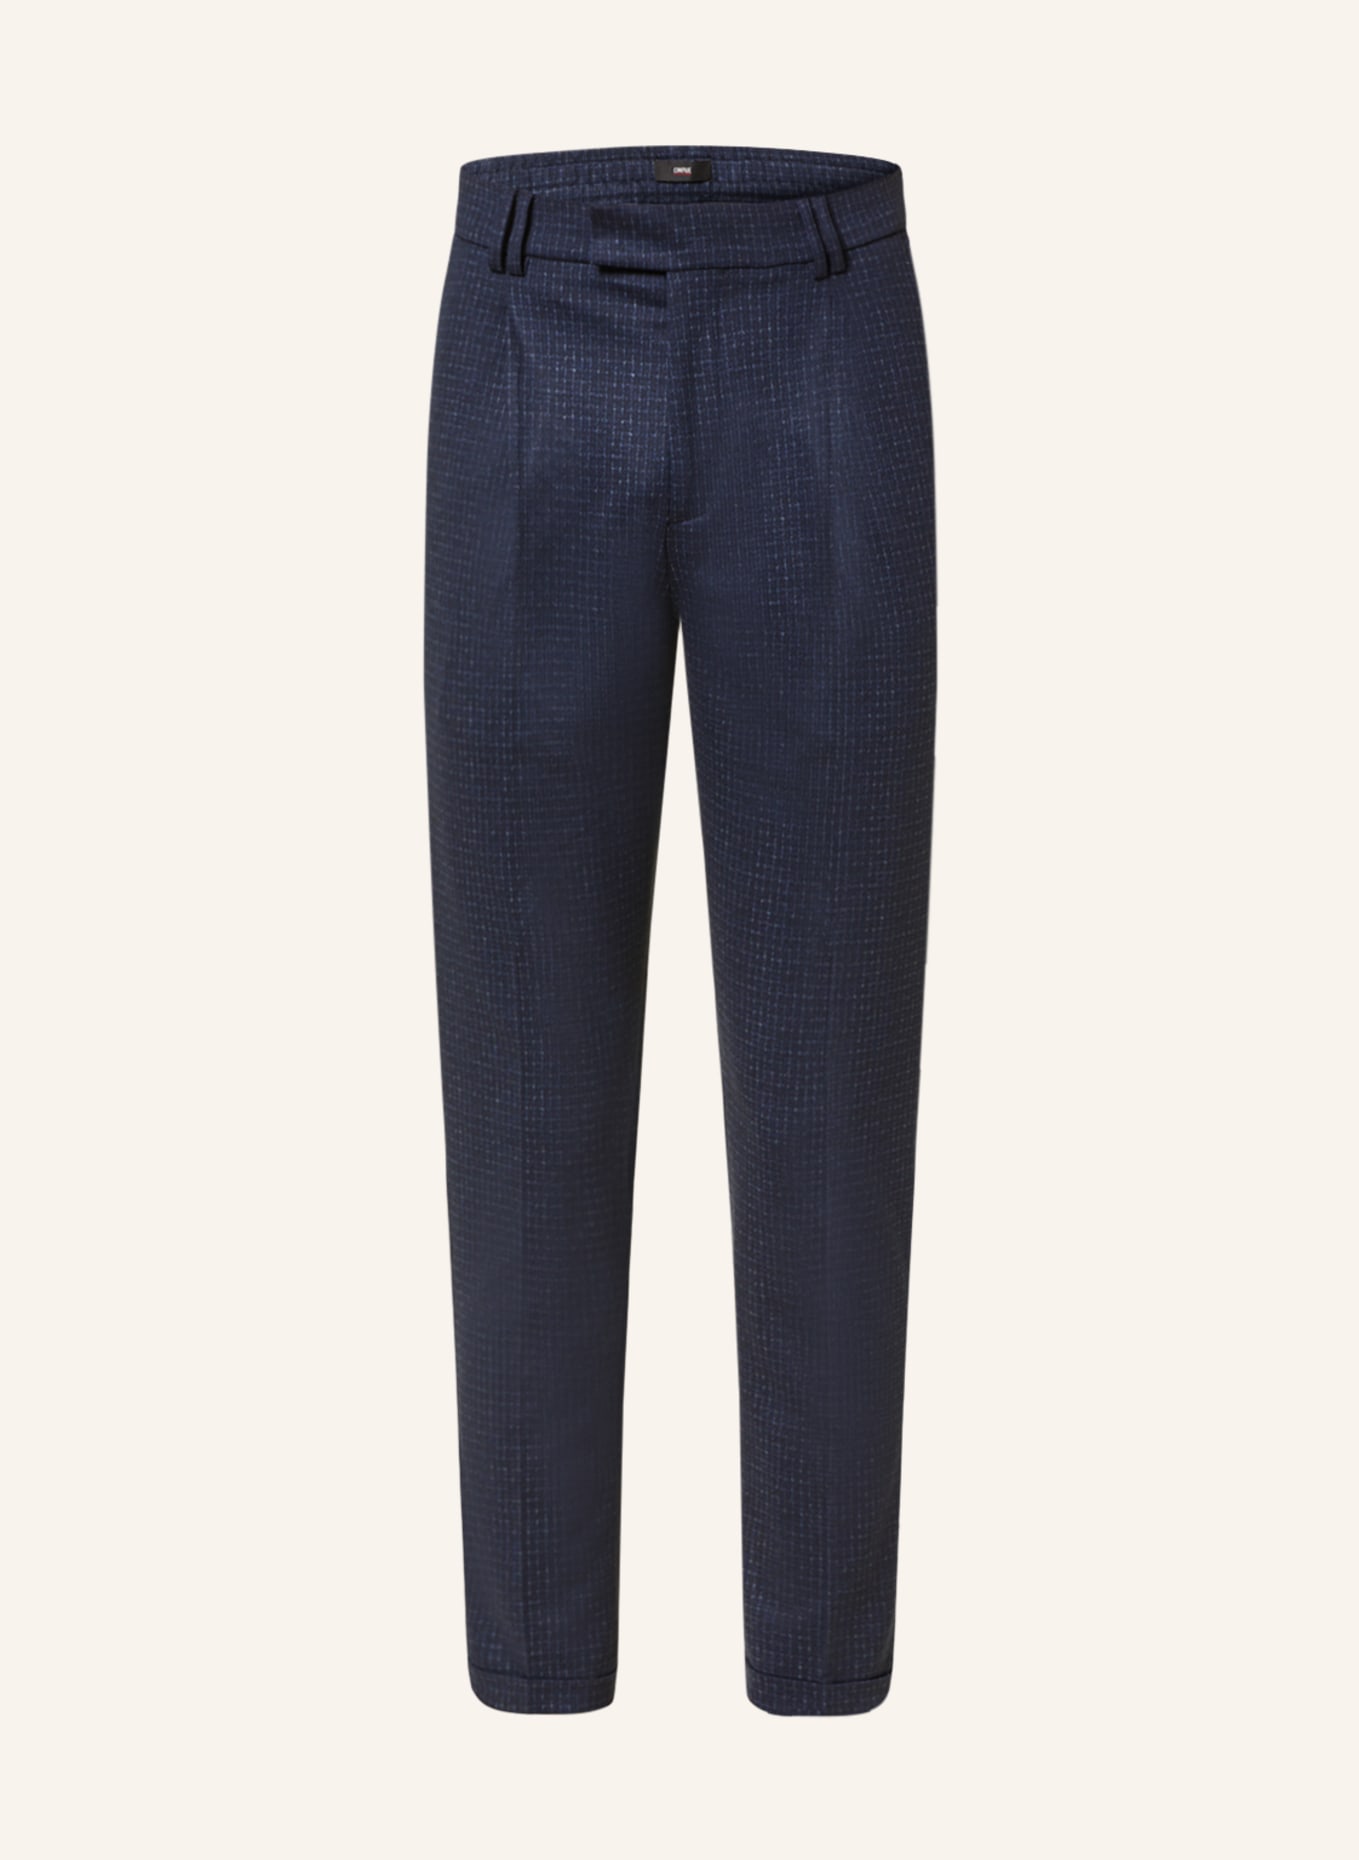 CINQUE Suit trousers CISAND relaxed fit made of jersey, Color: 69 DUNKELBLAU (Image 1)